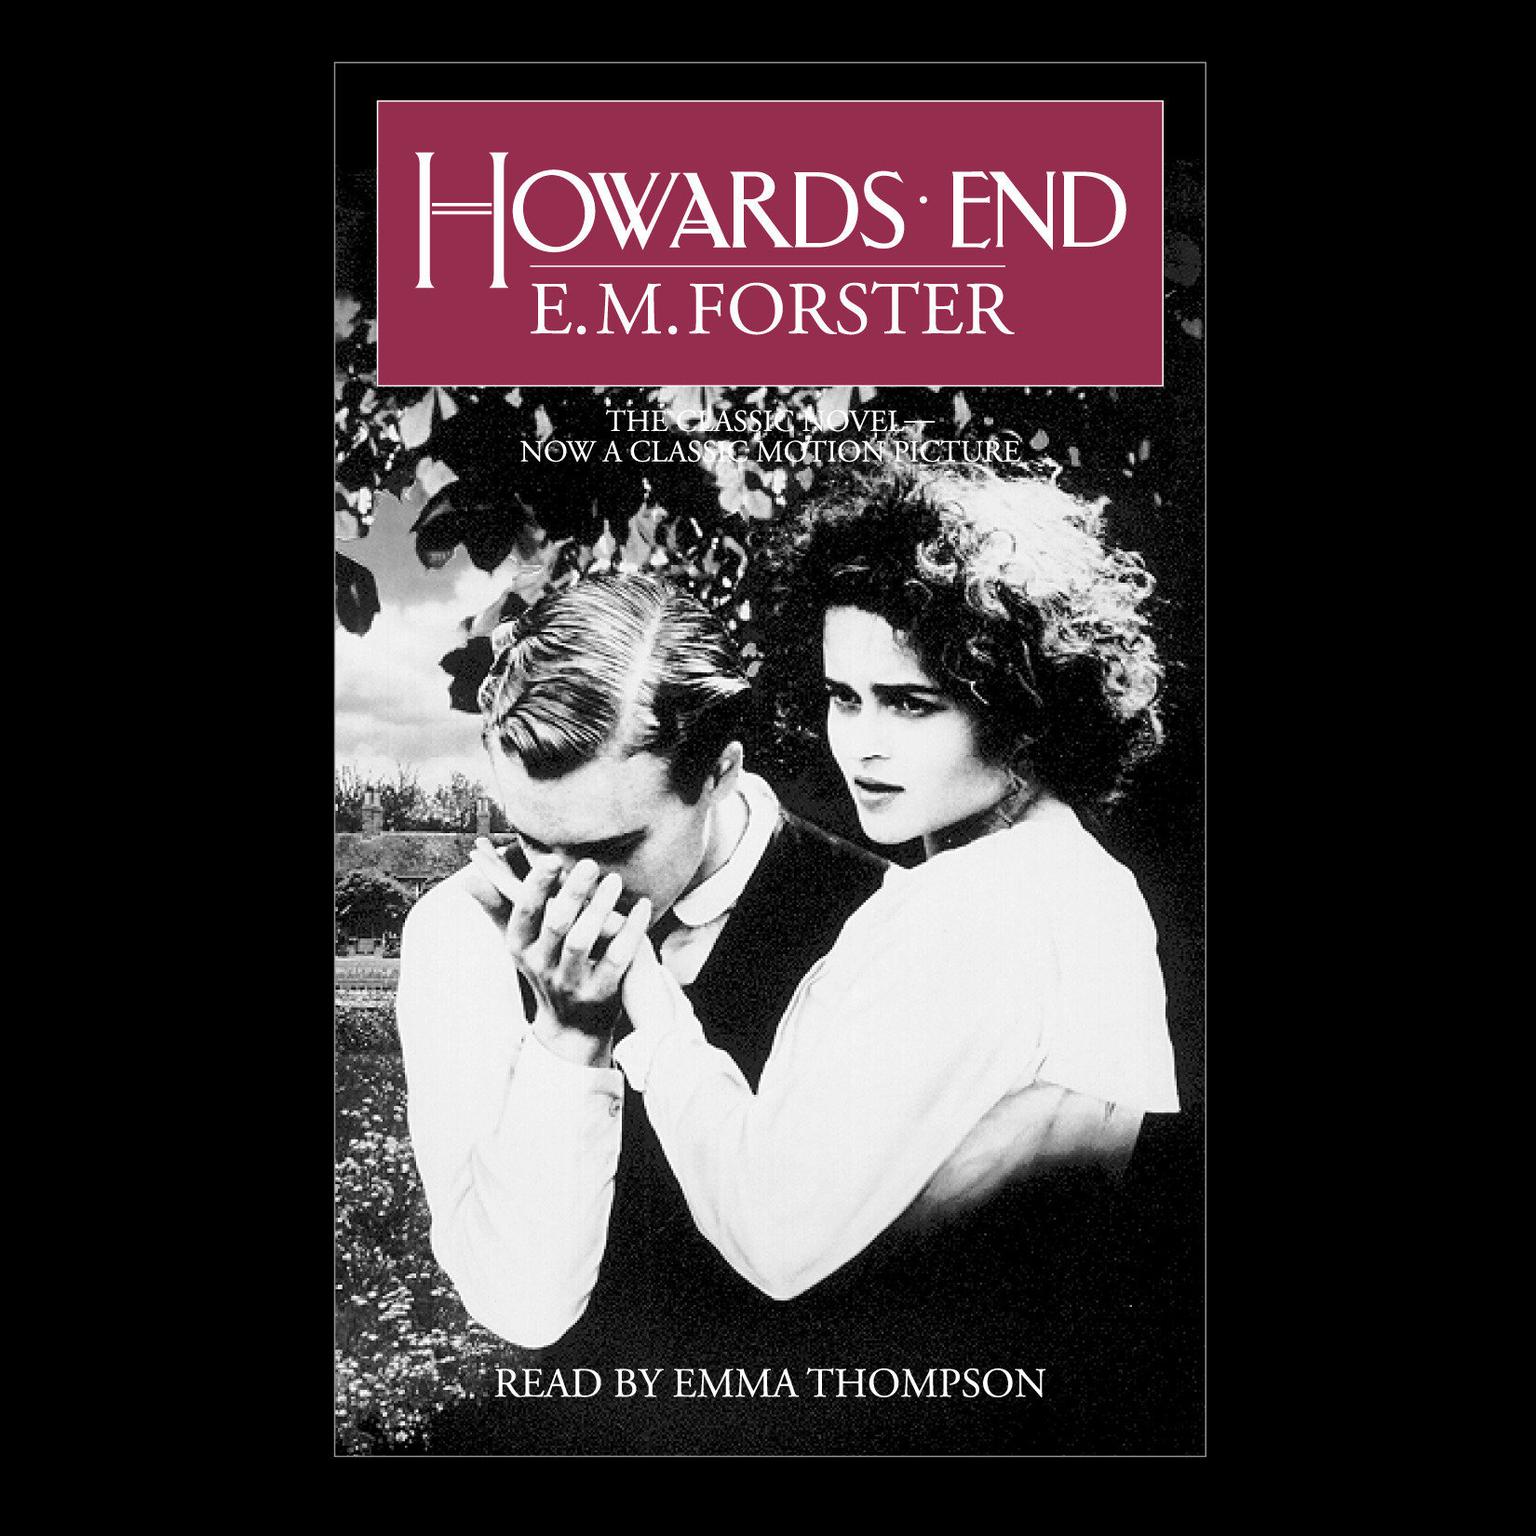 Howards End (Abridged): Centennial Edition Audiobook, by E. M. Forster